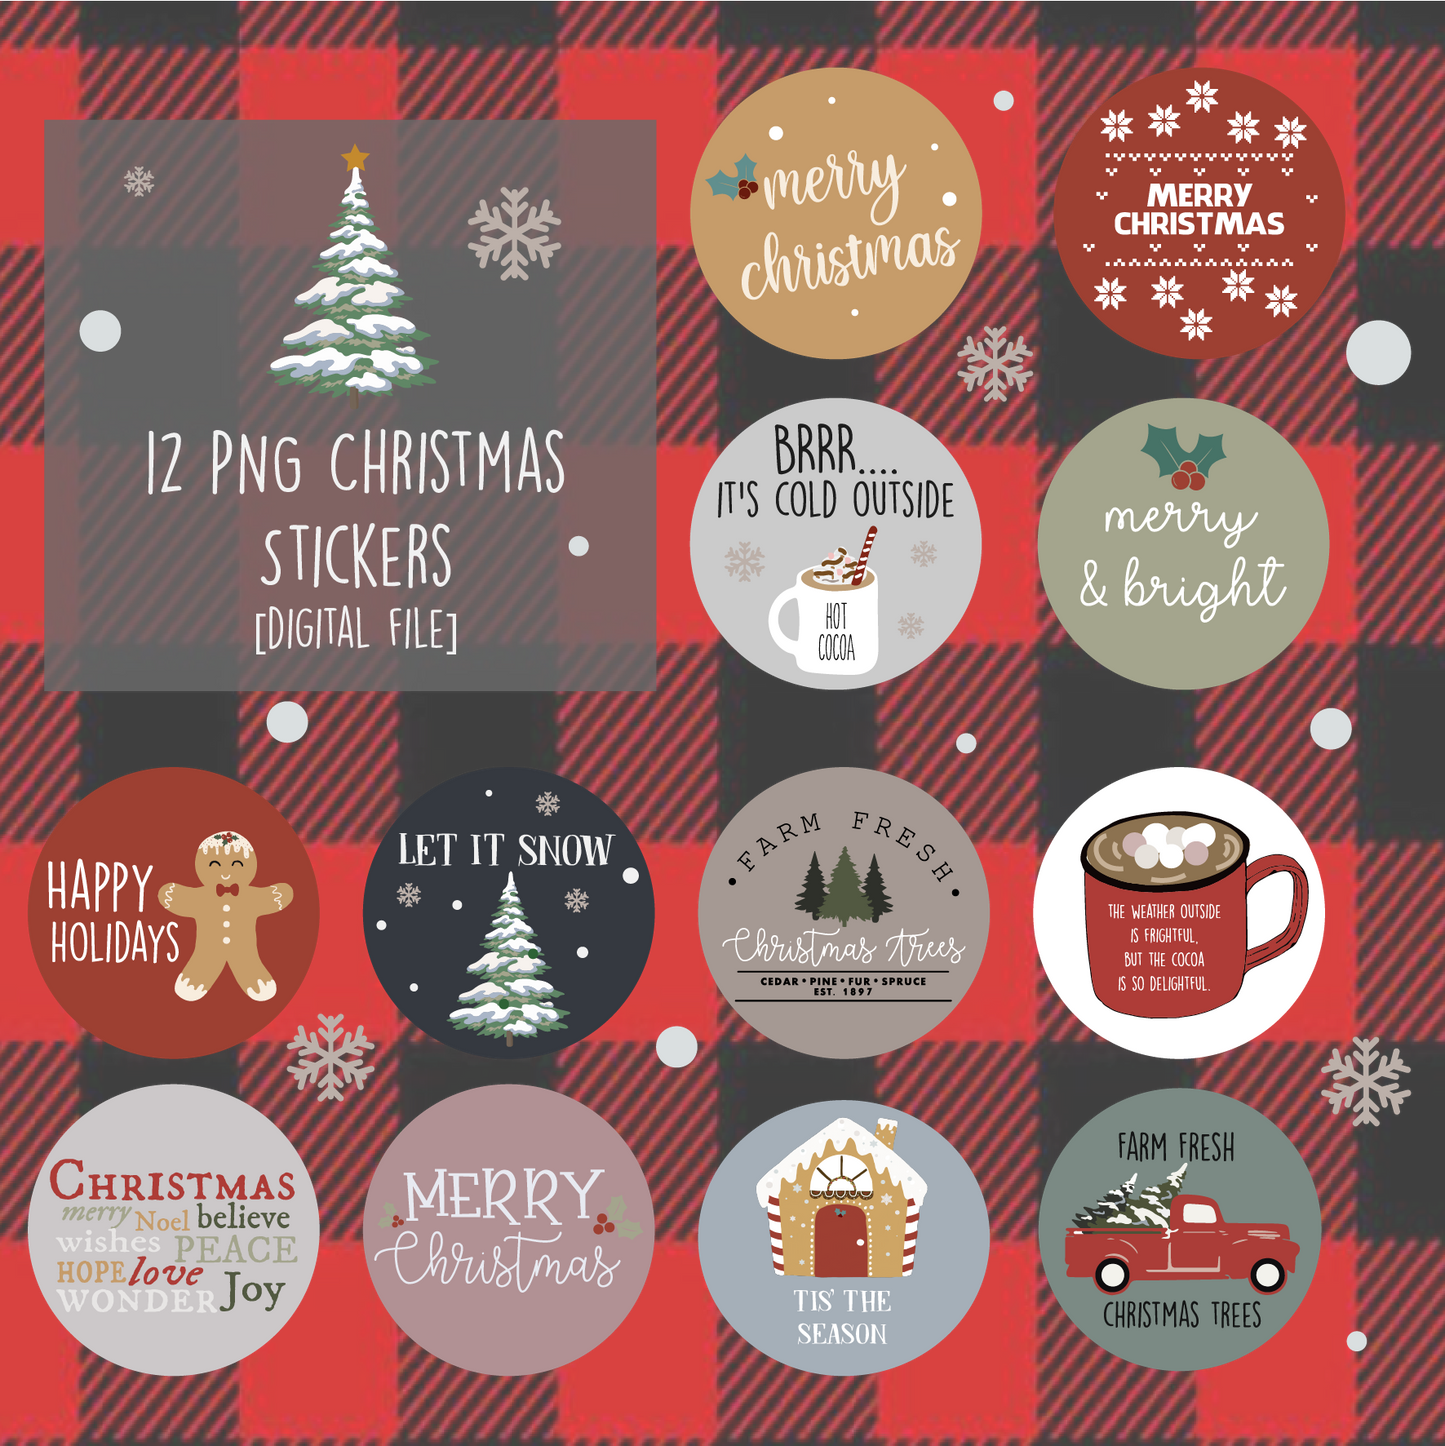 PNG Christmas Stickers (Digital File)